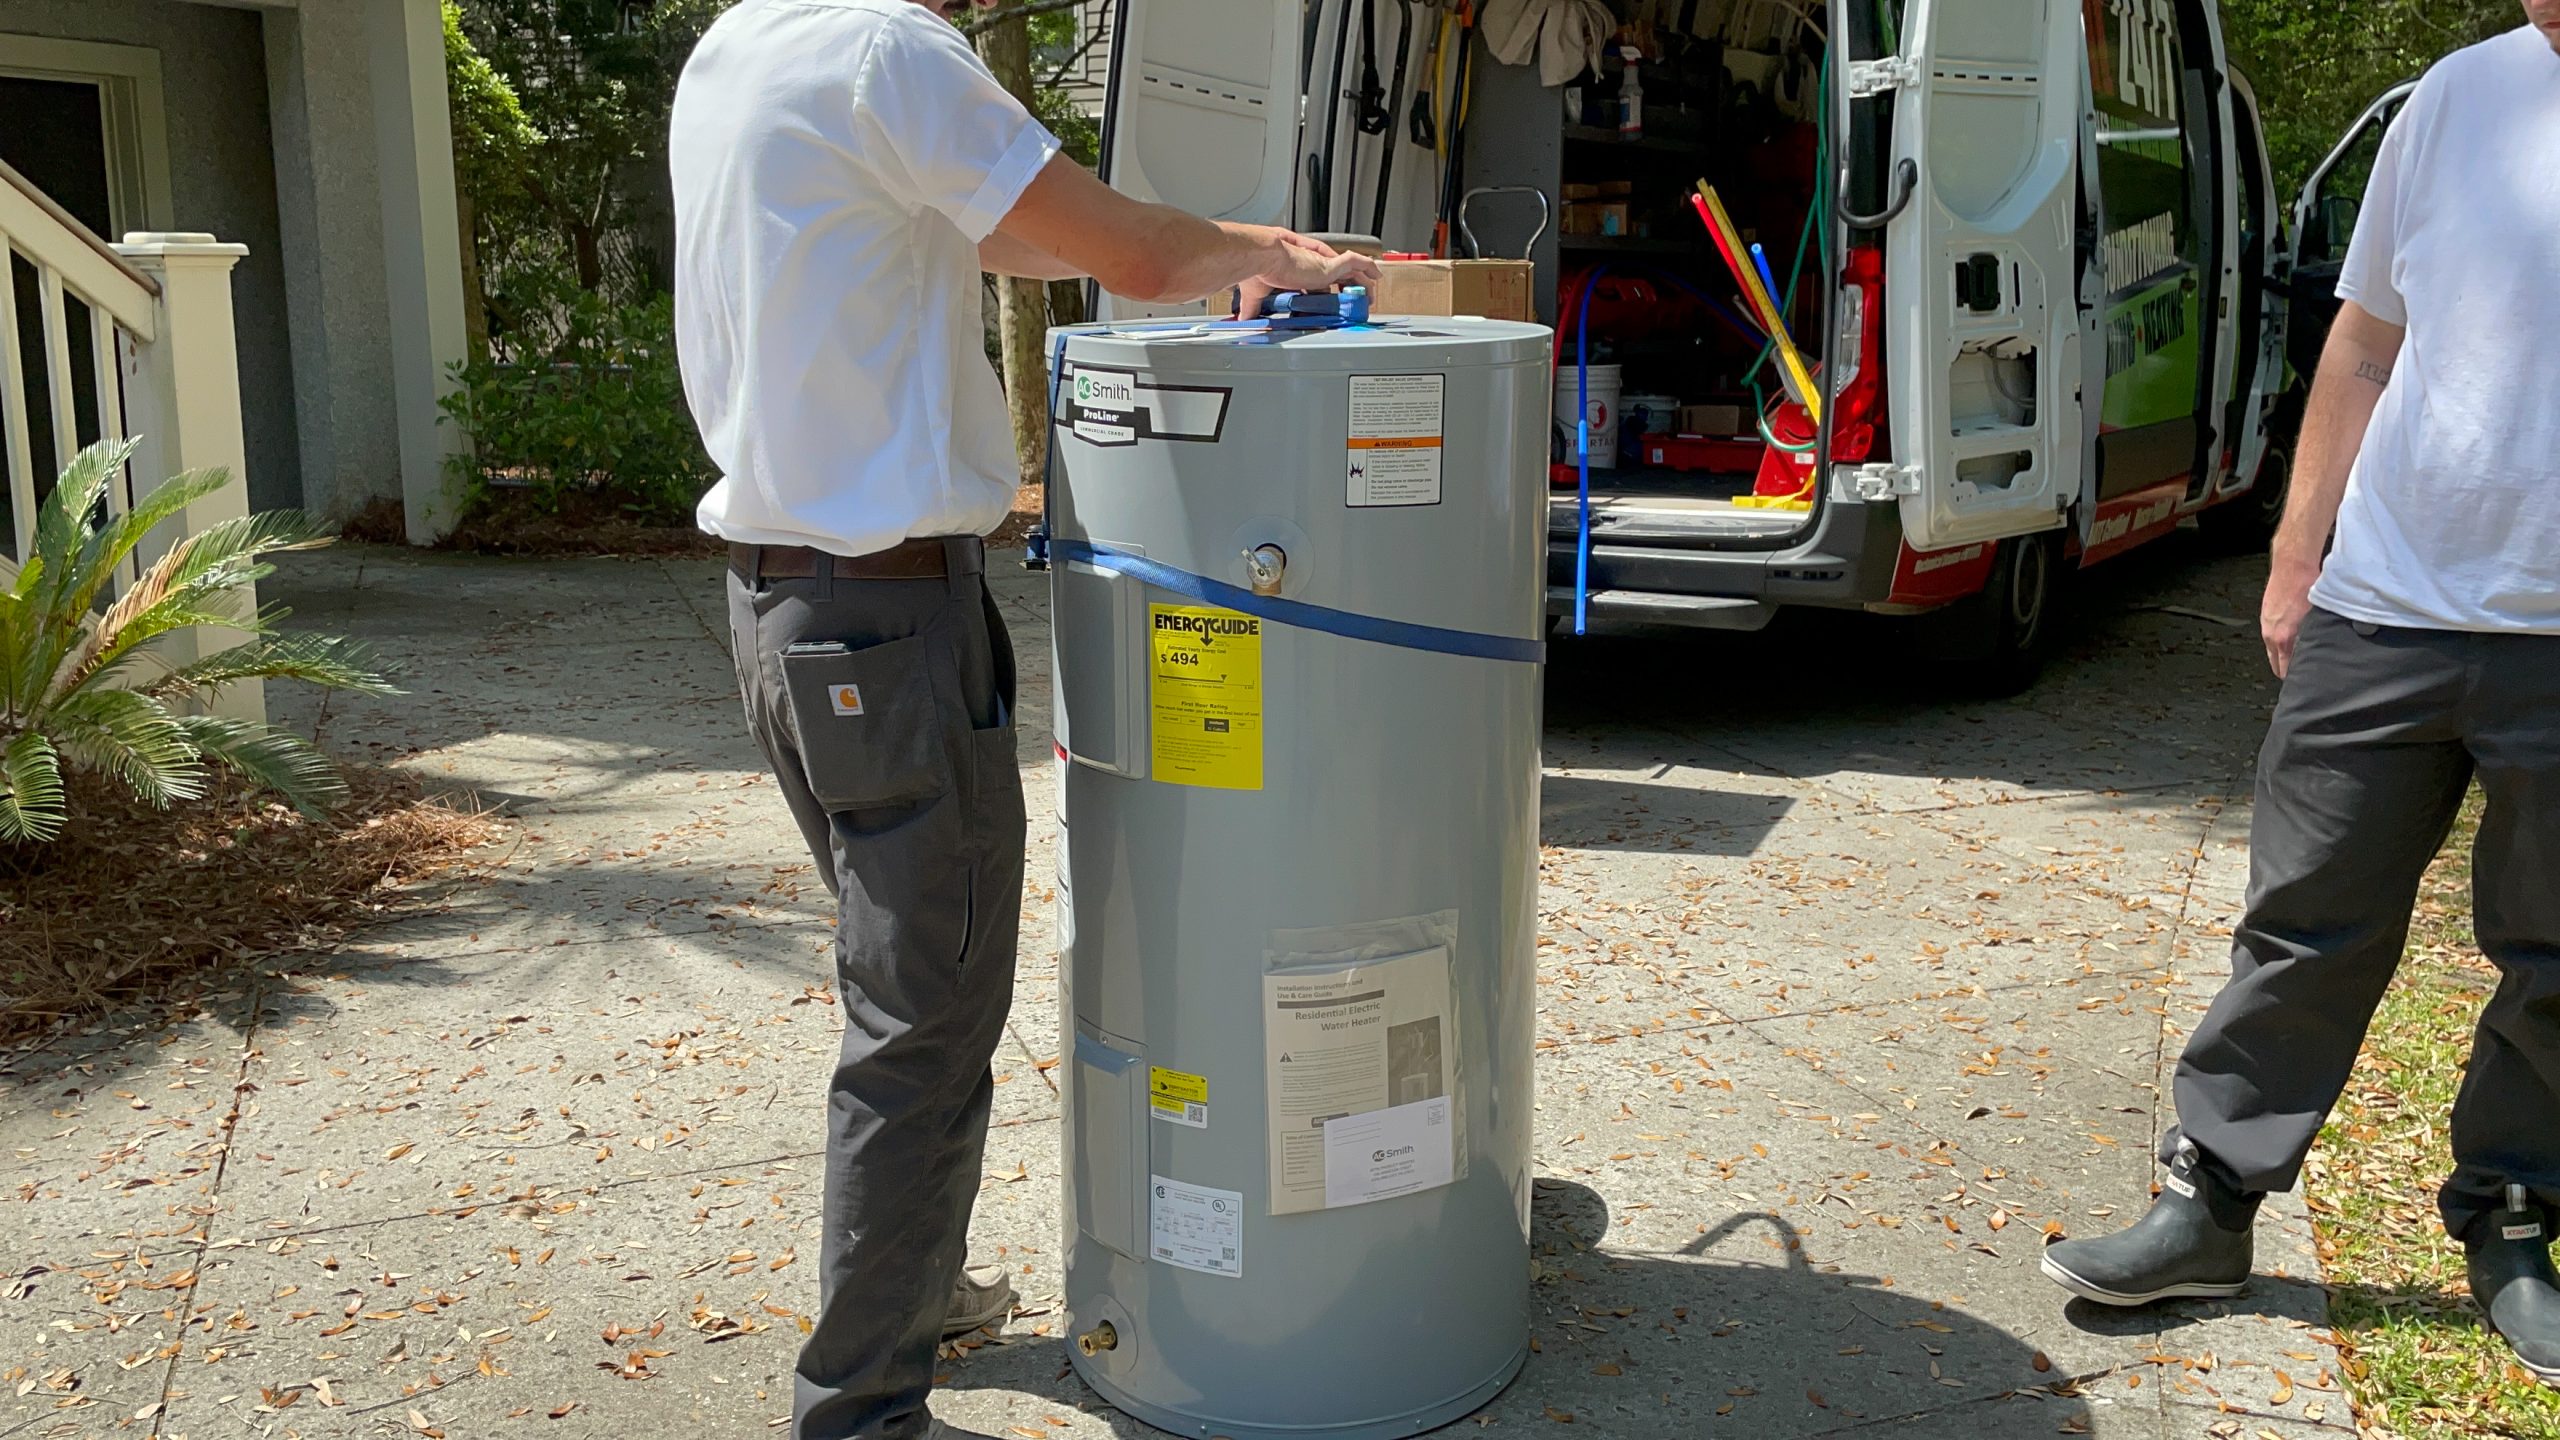 Water Heater Repair in Charleston, SC from Fix-it 24/7 Air Conditioning, Plumbing & Heating